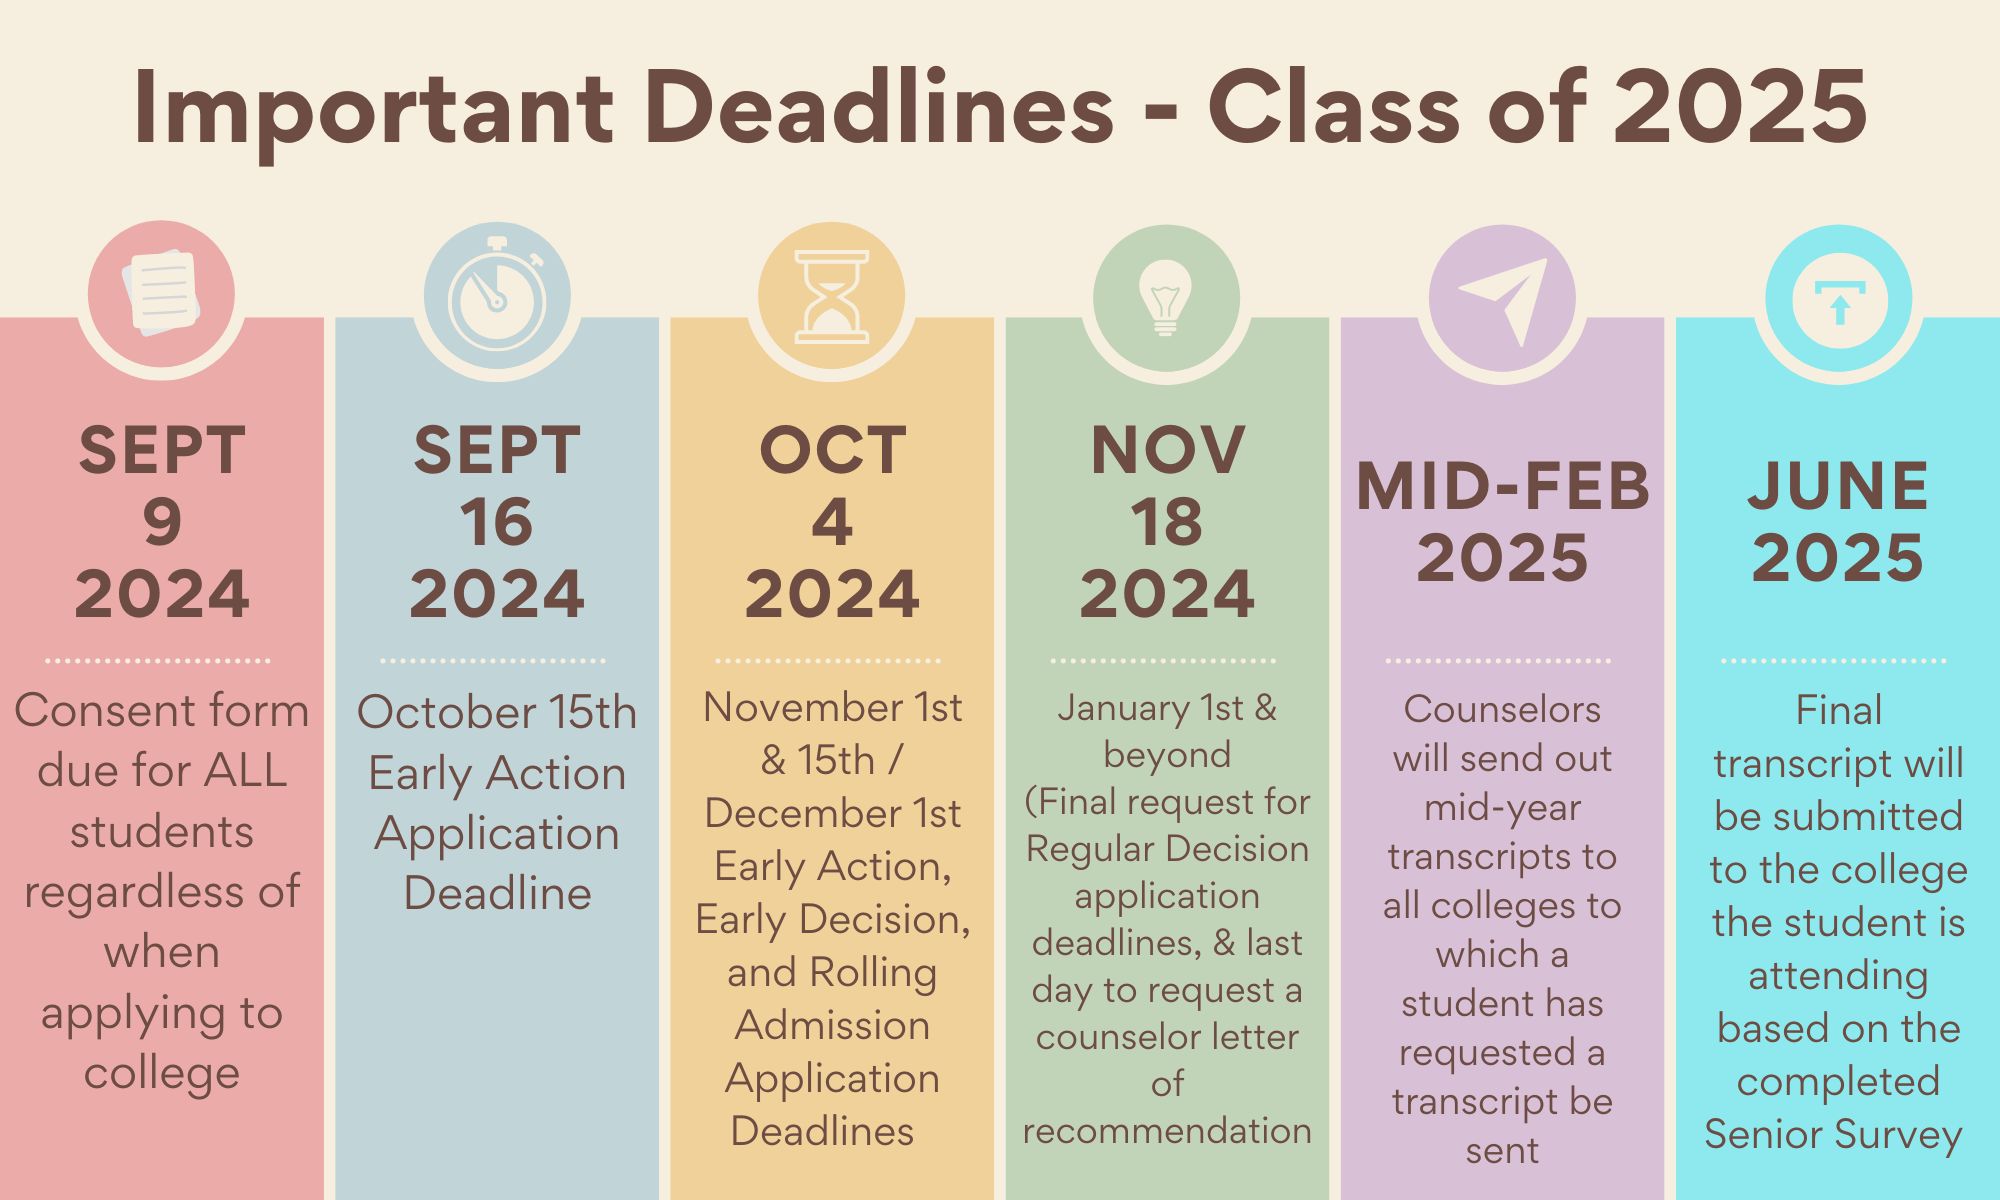 Important Deadlines - Class of 2025